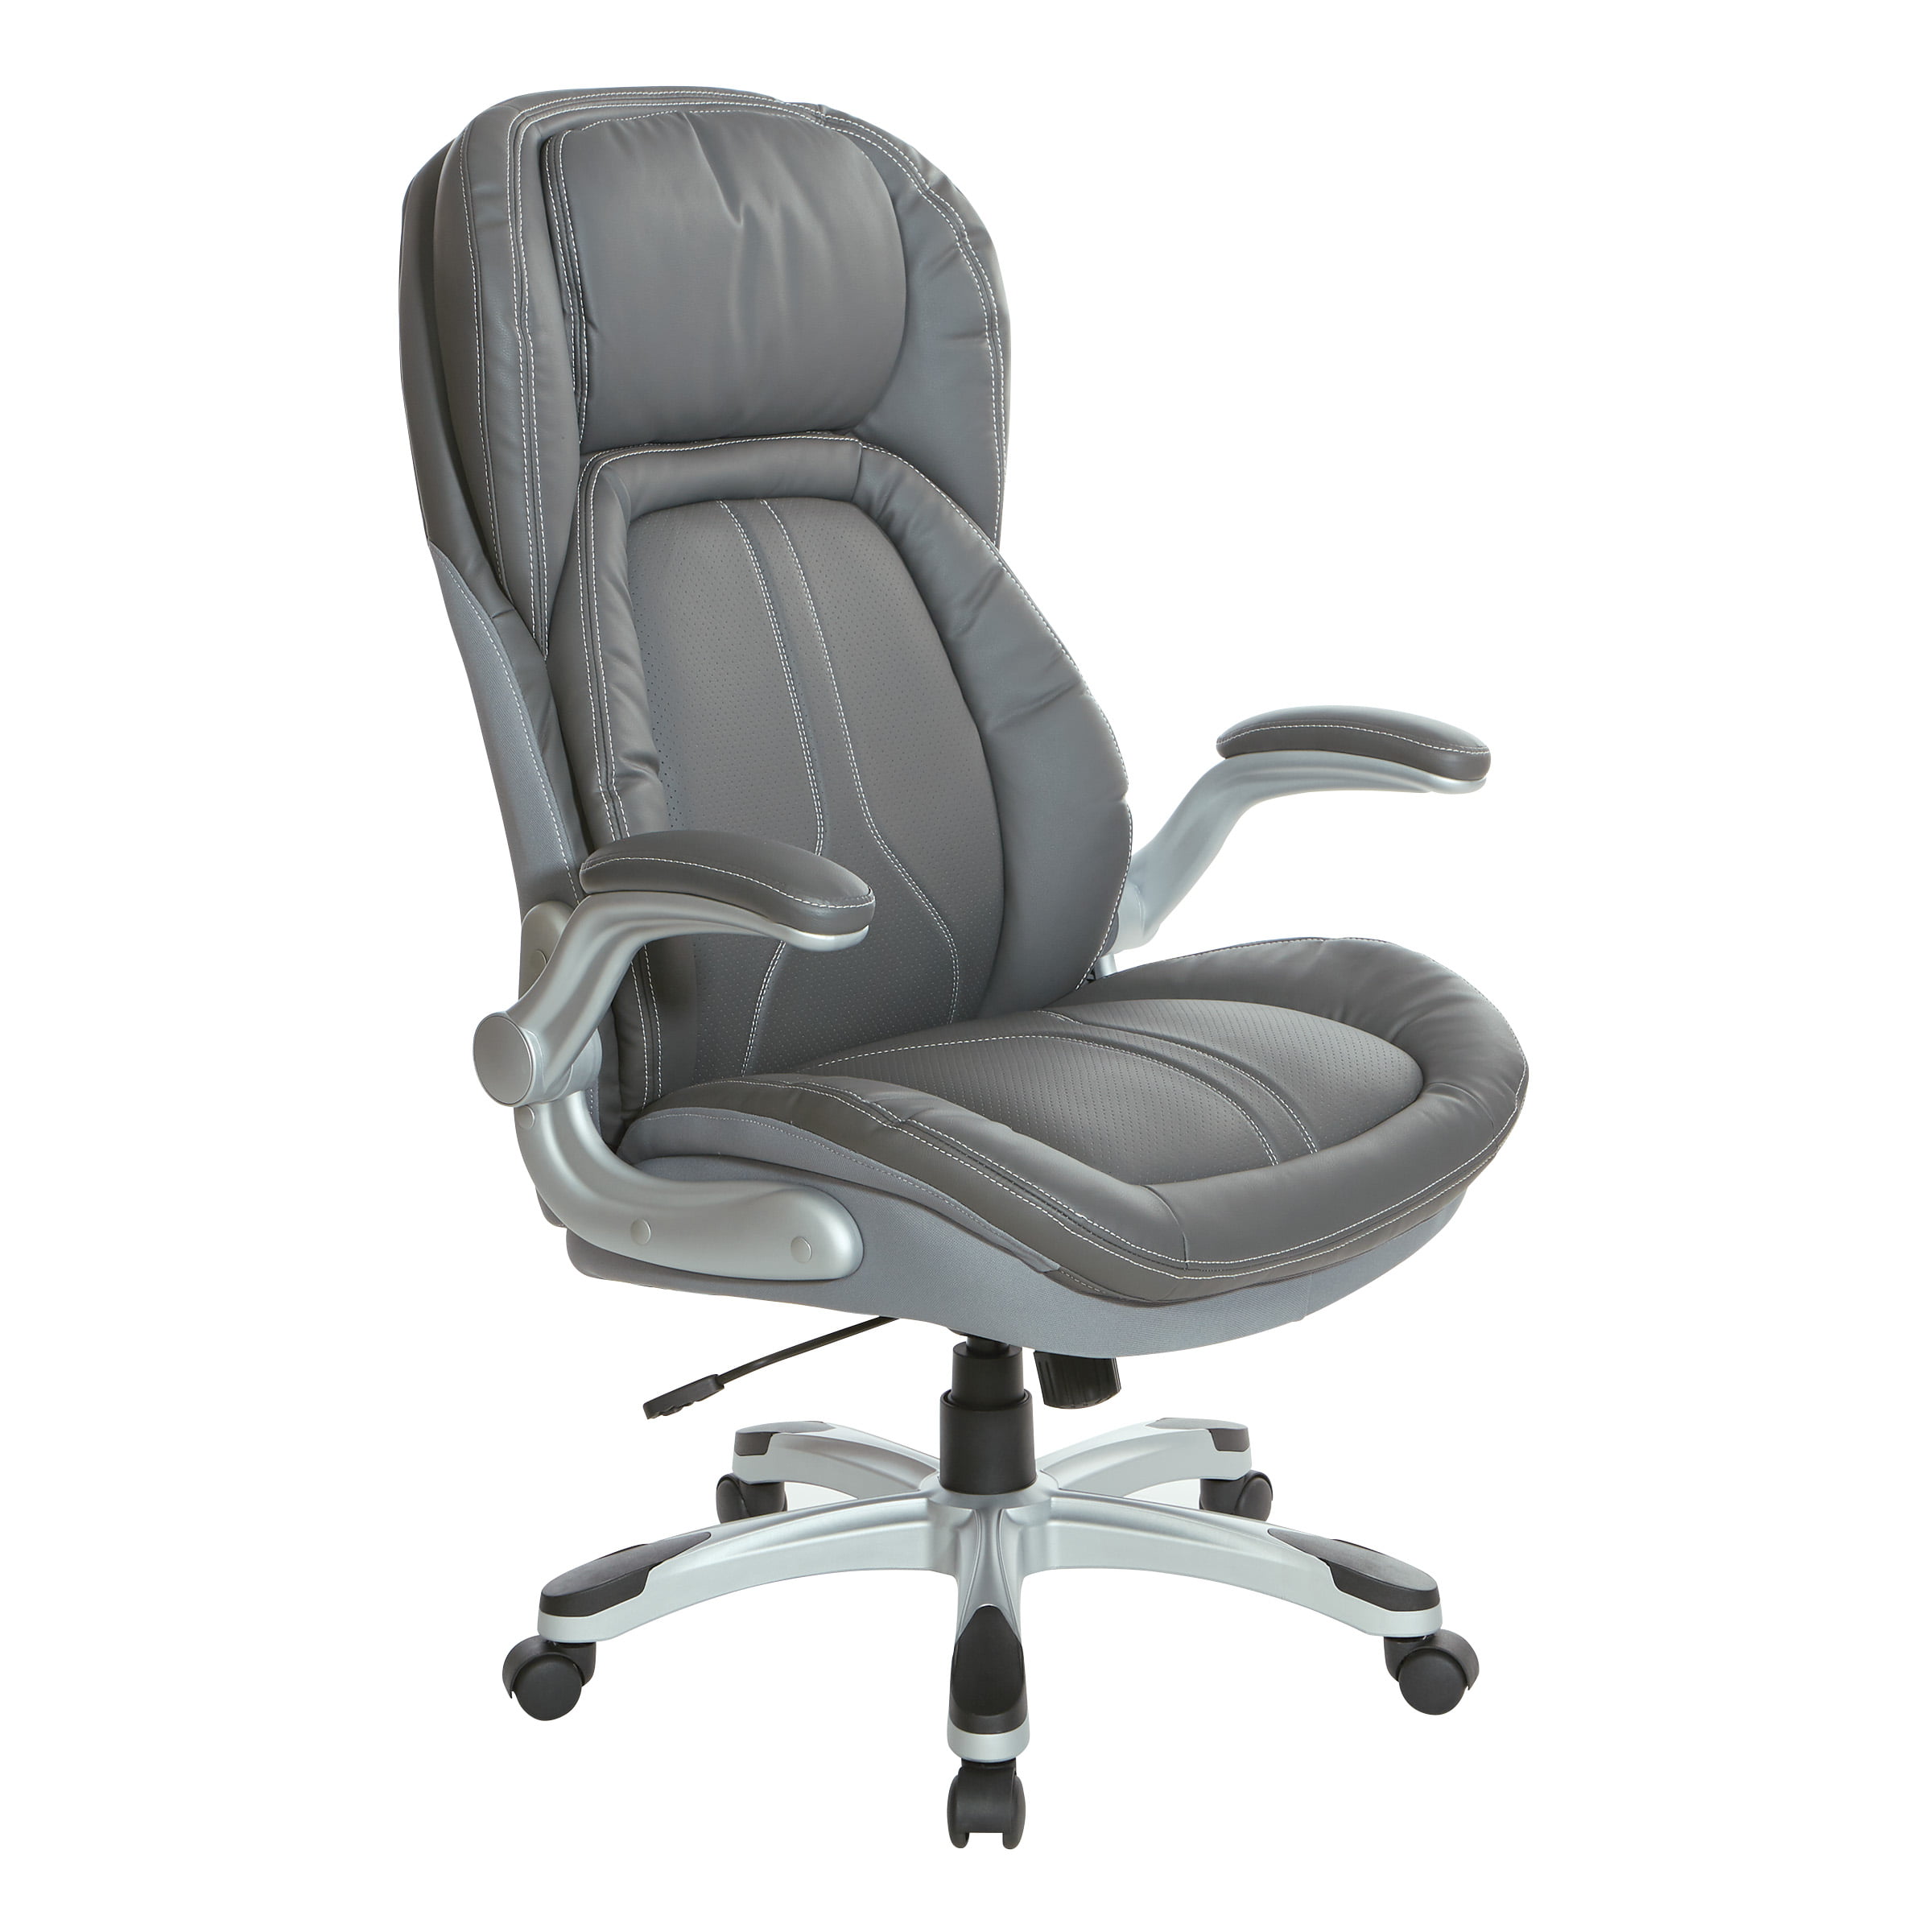 Grey leather office chair